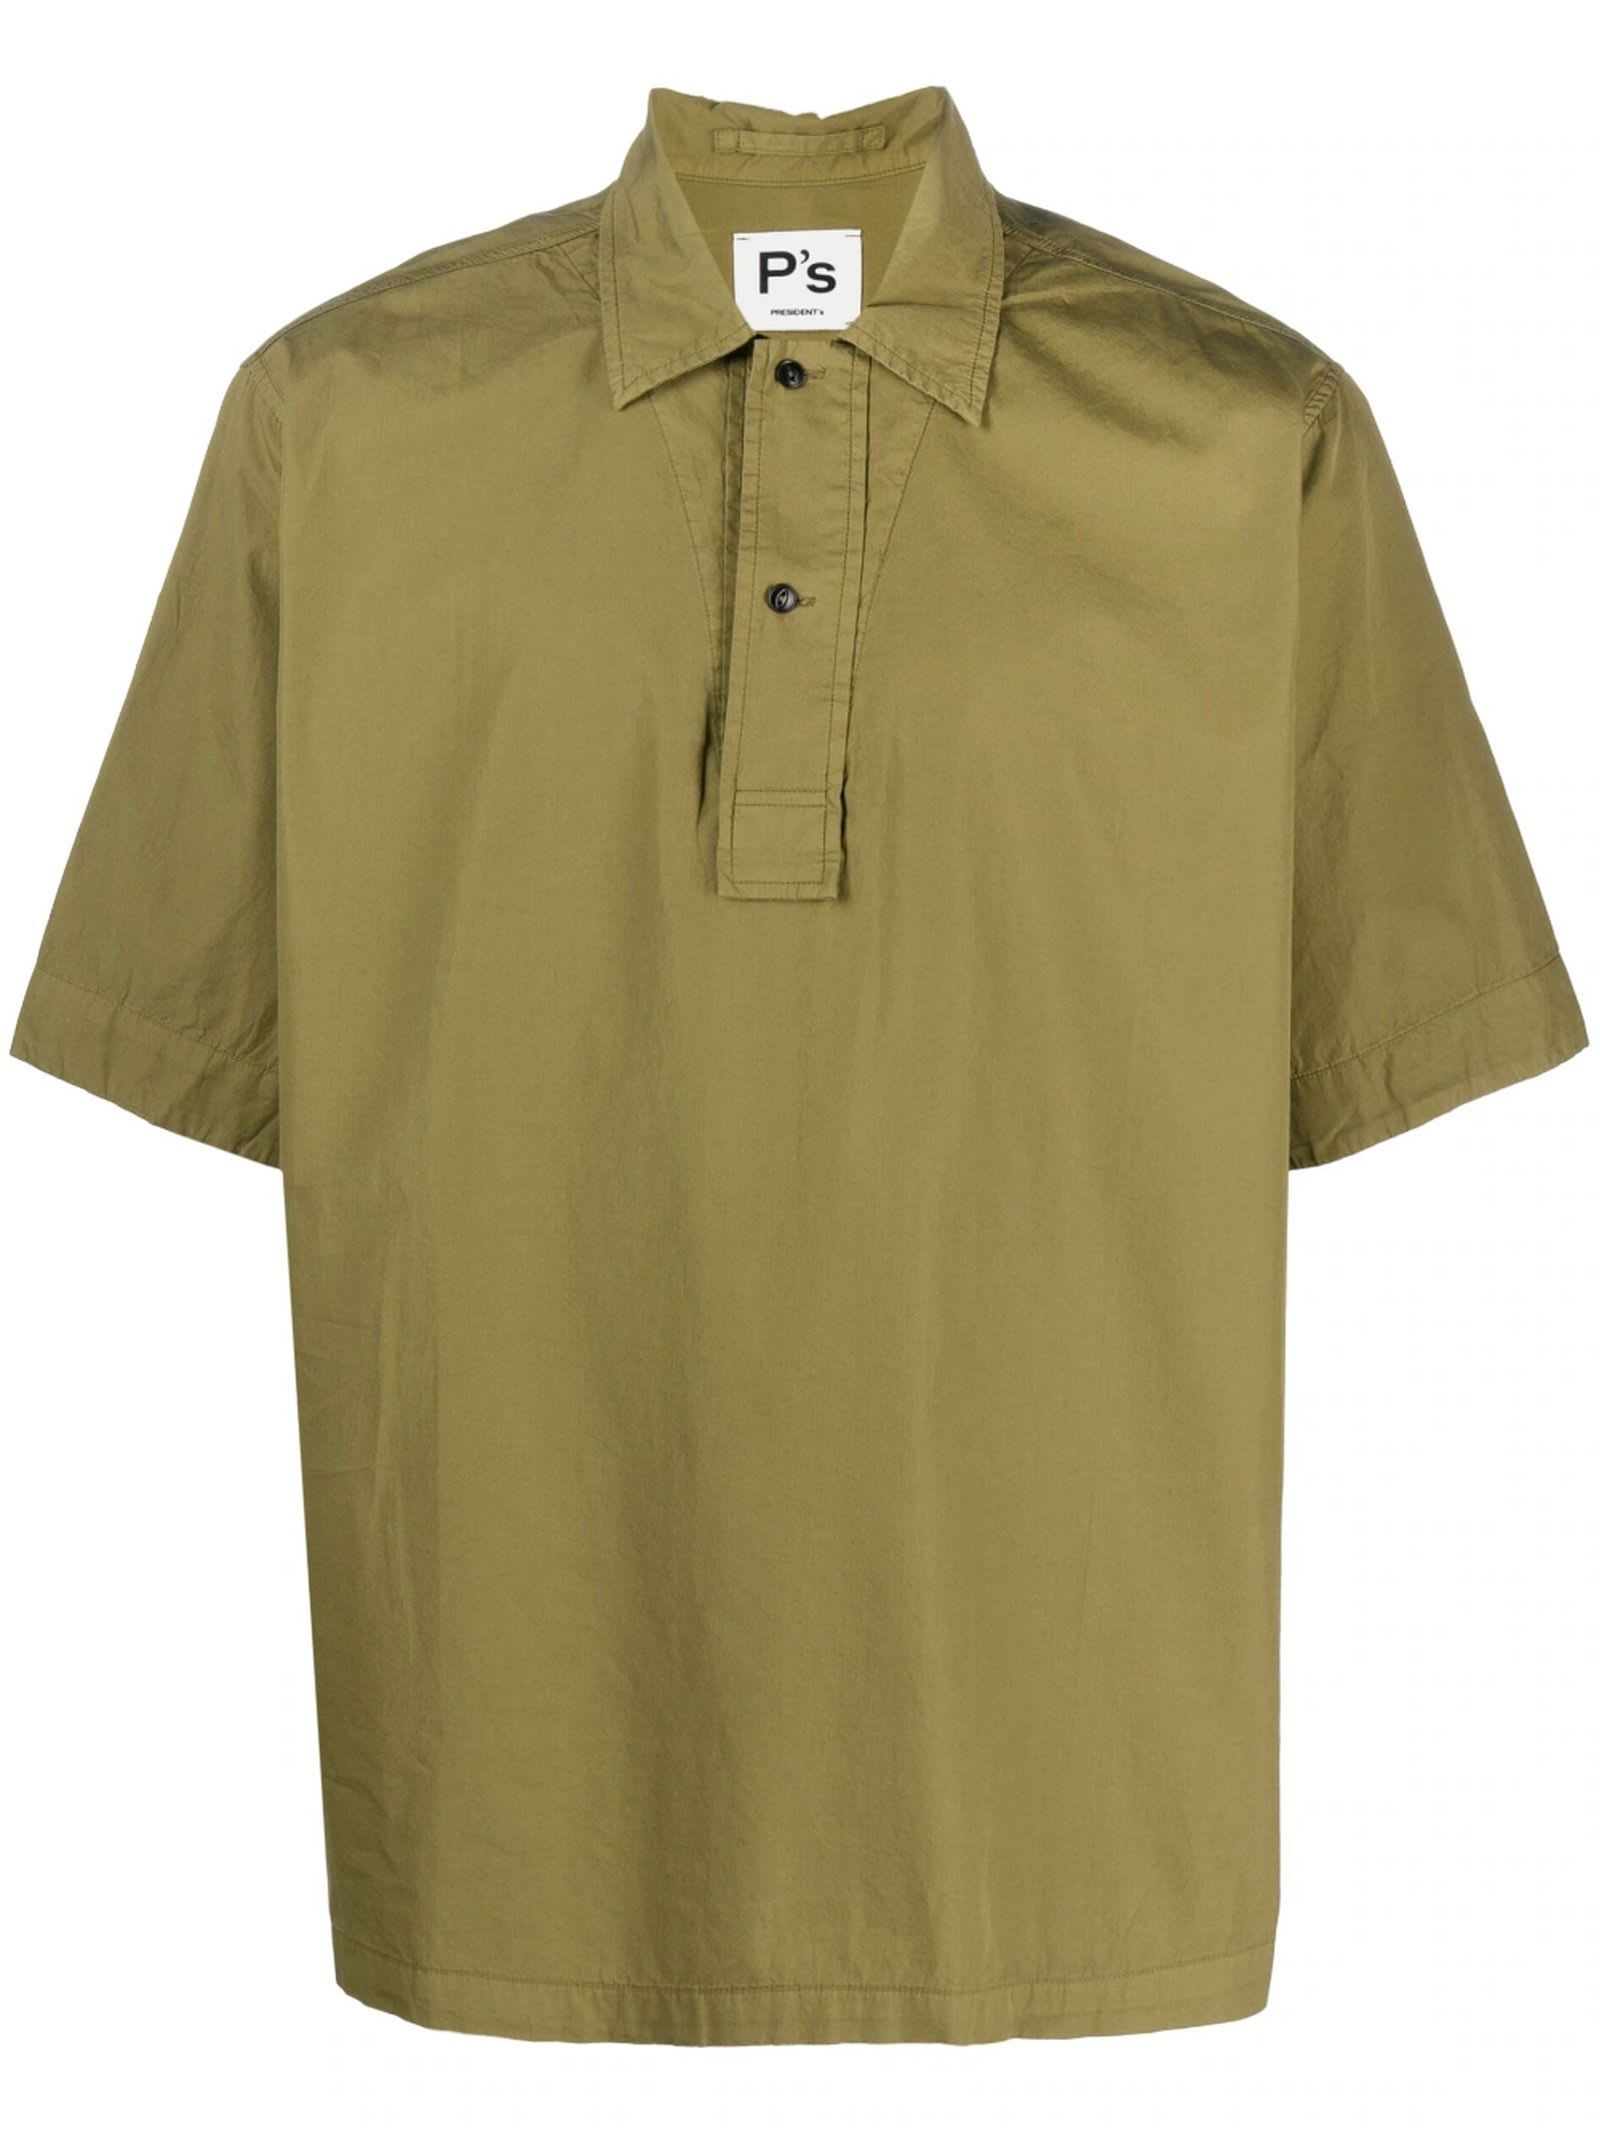 PRESIDENT'S OLIVE GREEN COTTON SHIRT